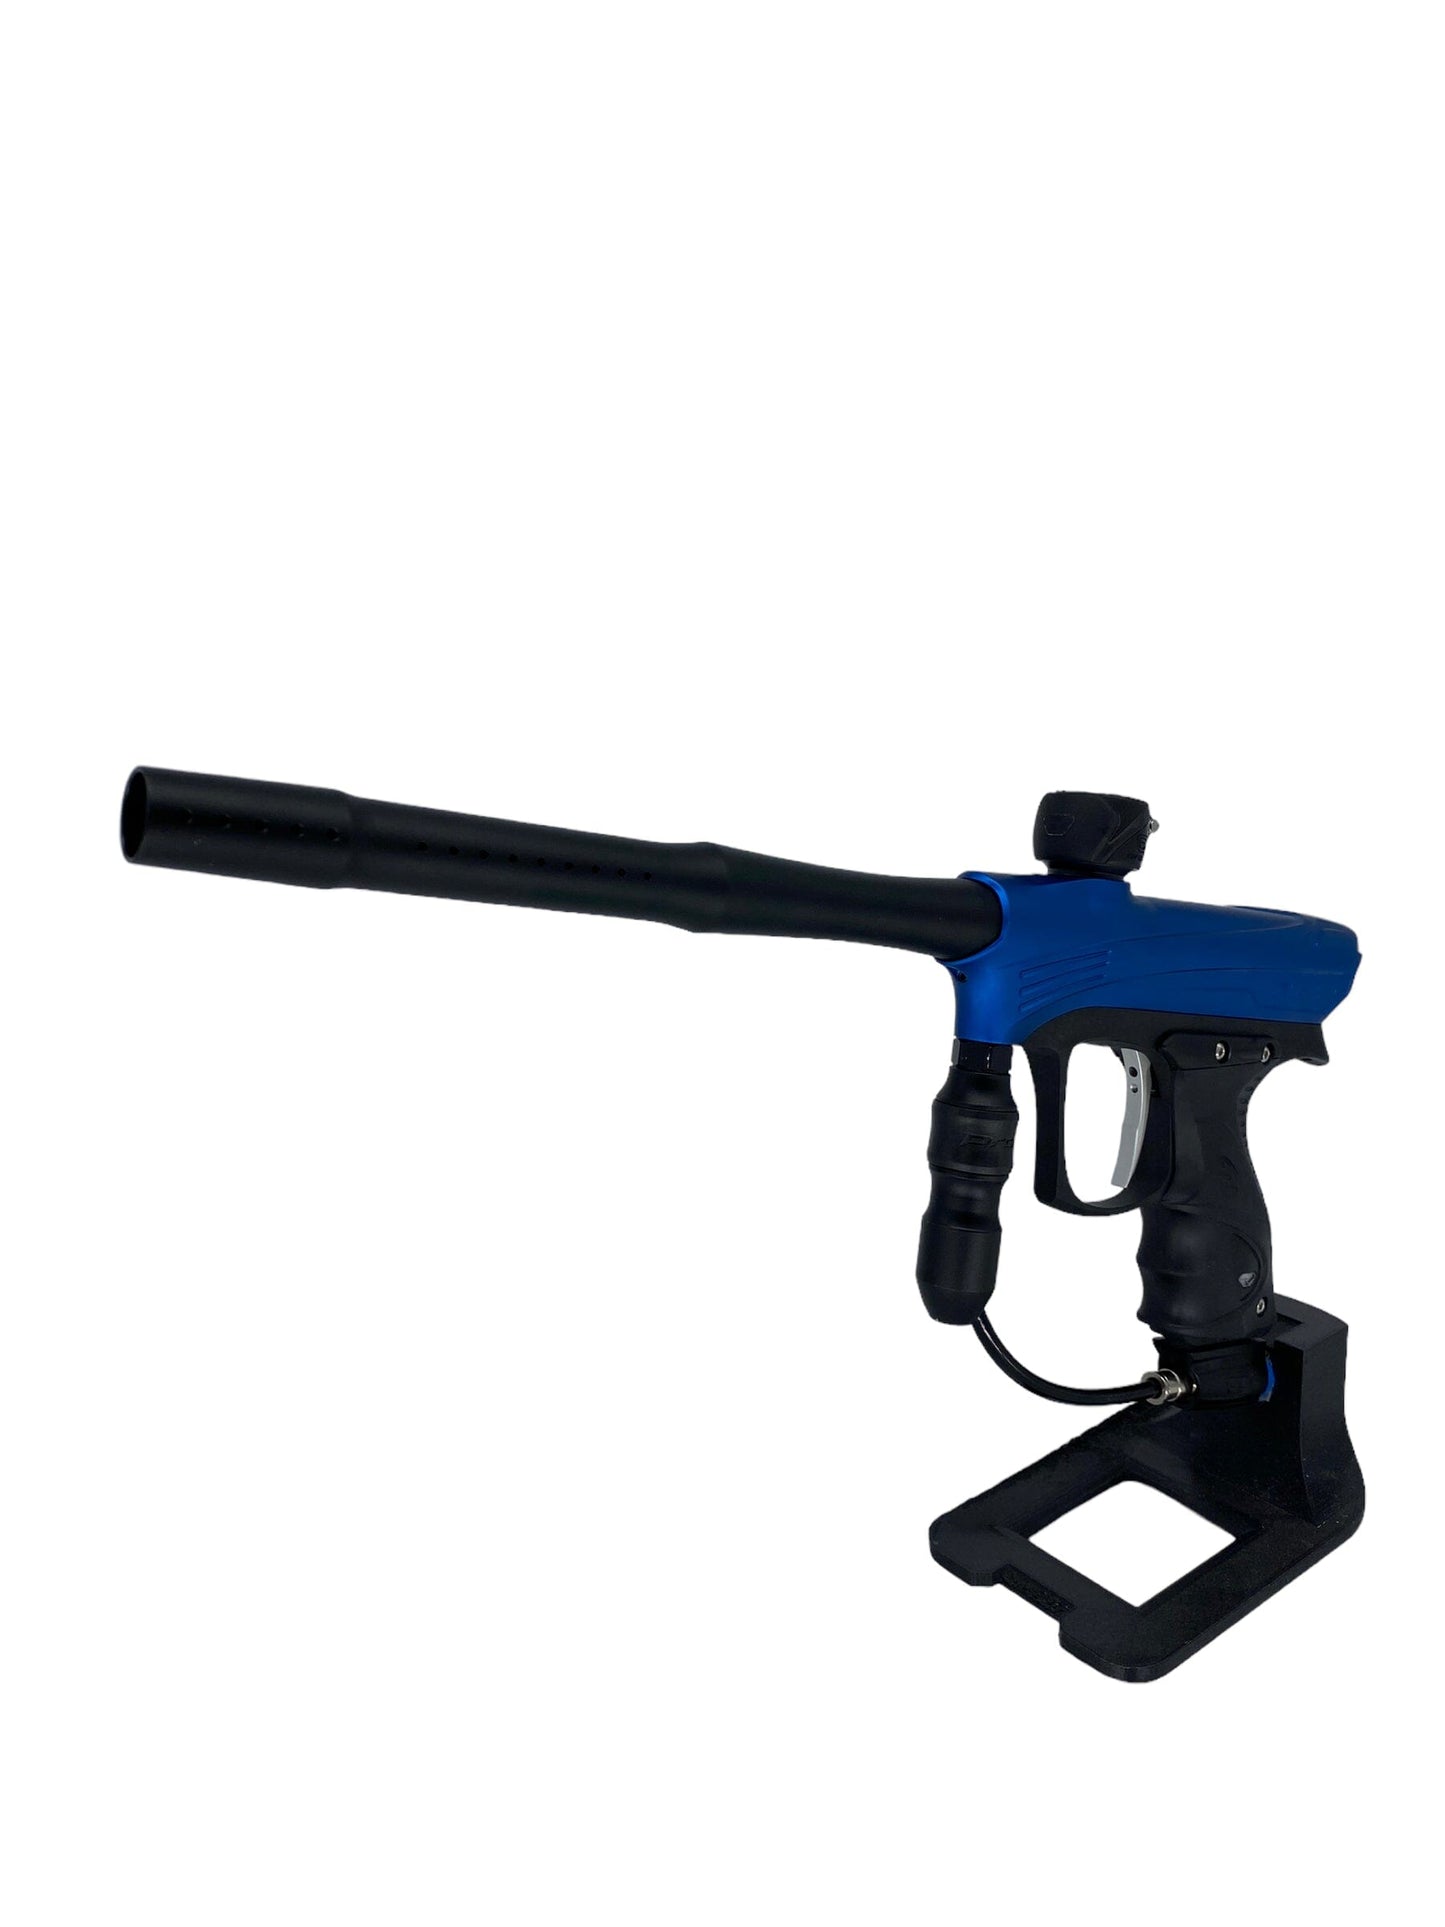 Used Dye Rize Paintball Gun from CPXBrosPaintball Buy/Sell/Trade Paintball Markers, Paintball Hoppers, Paintball Masks, and Hormesis Headbands